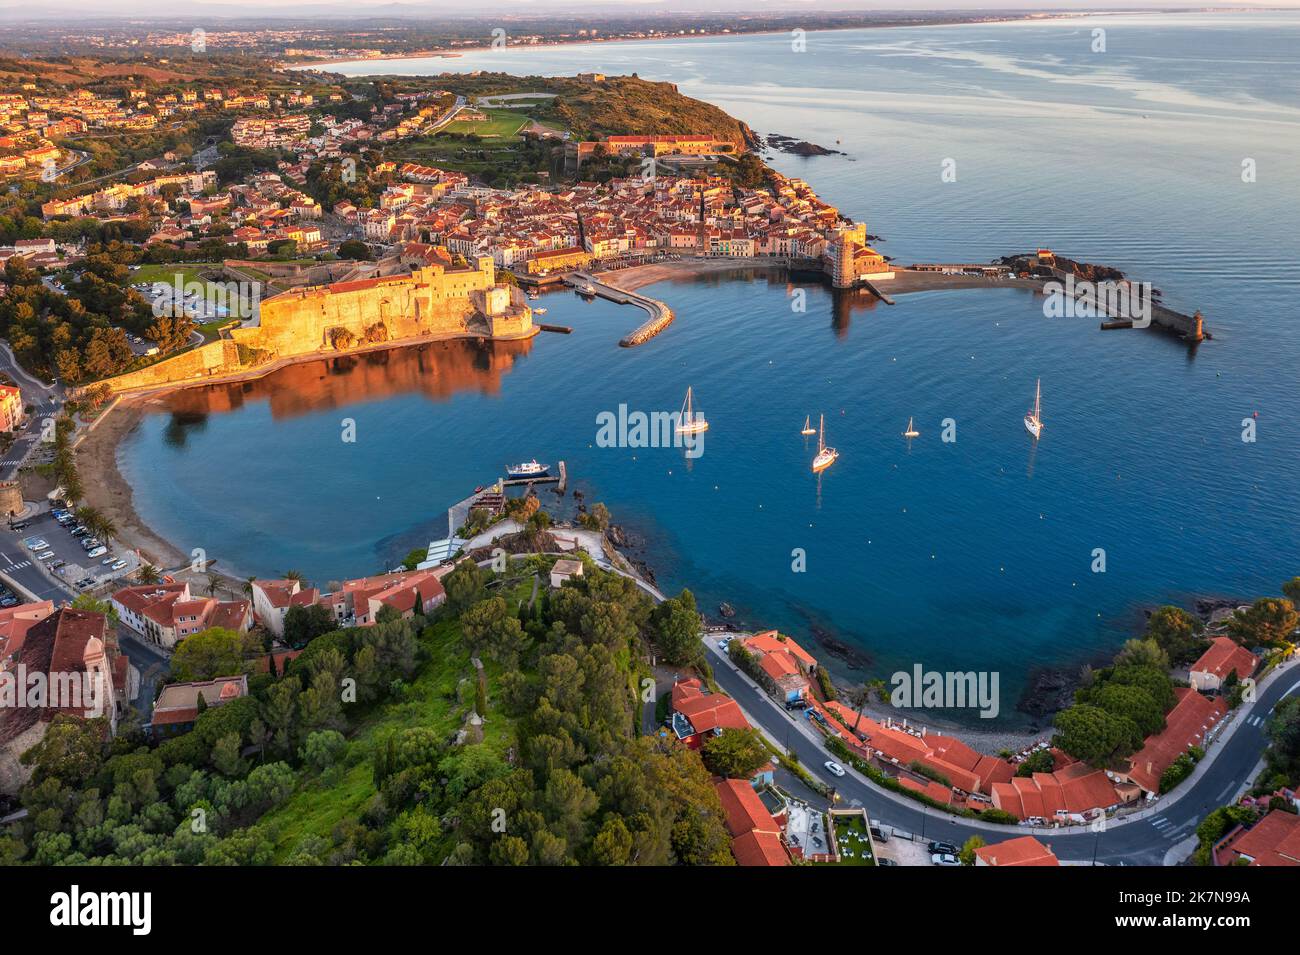 Collioure, a popular resort town on Vermilion Coast of Mediterranean Sea, France, aerial view of the historical Old town, the Castle and marina Stock Photo